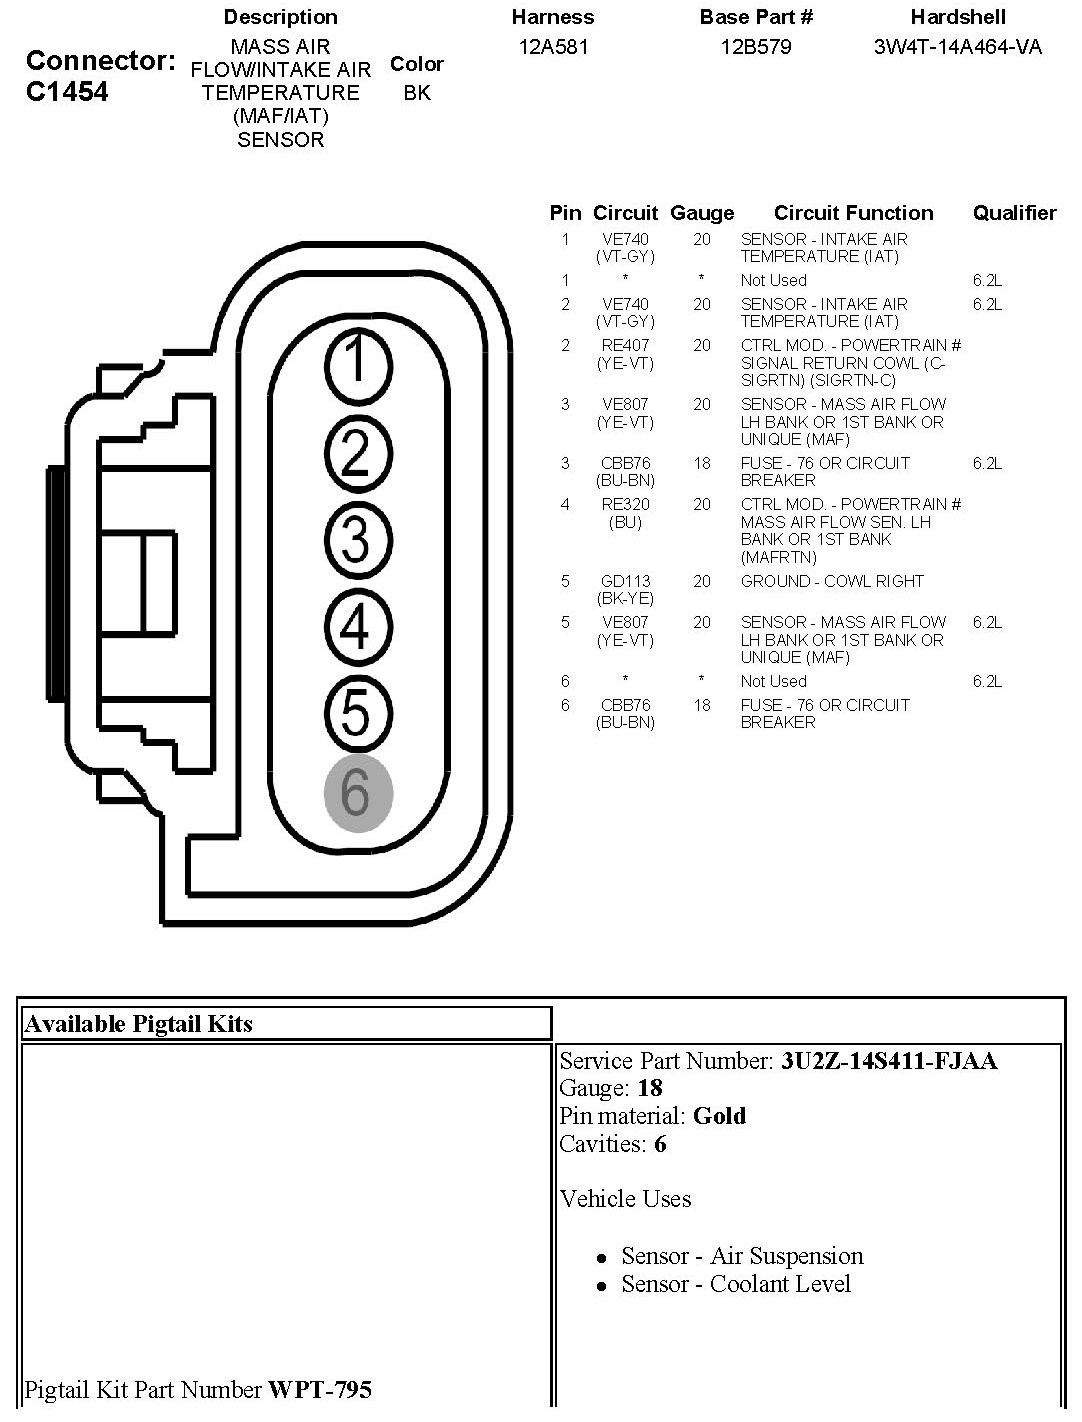 It is going to be pin 1 and 2 at the mass air flow sensor connector Here is a diagram